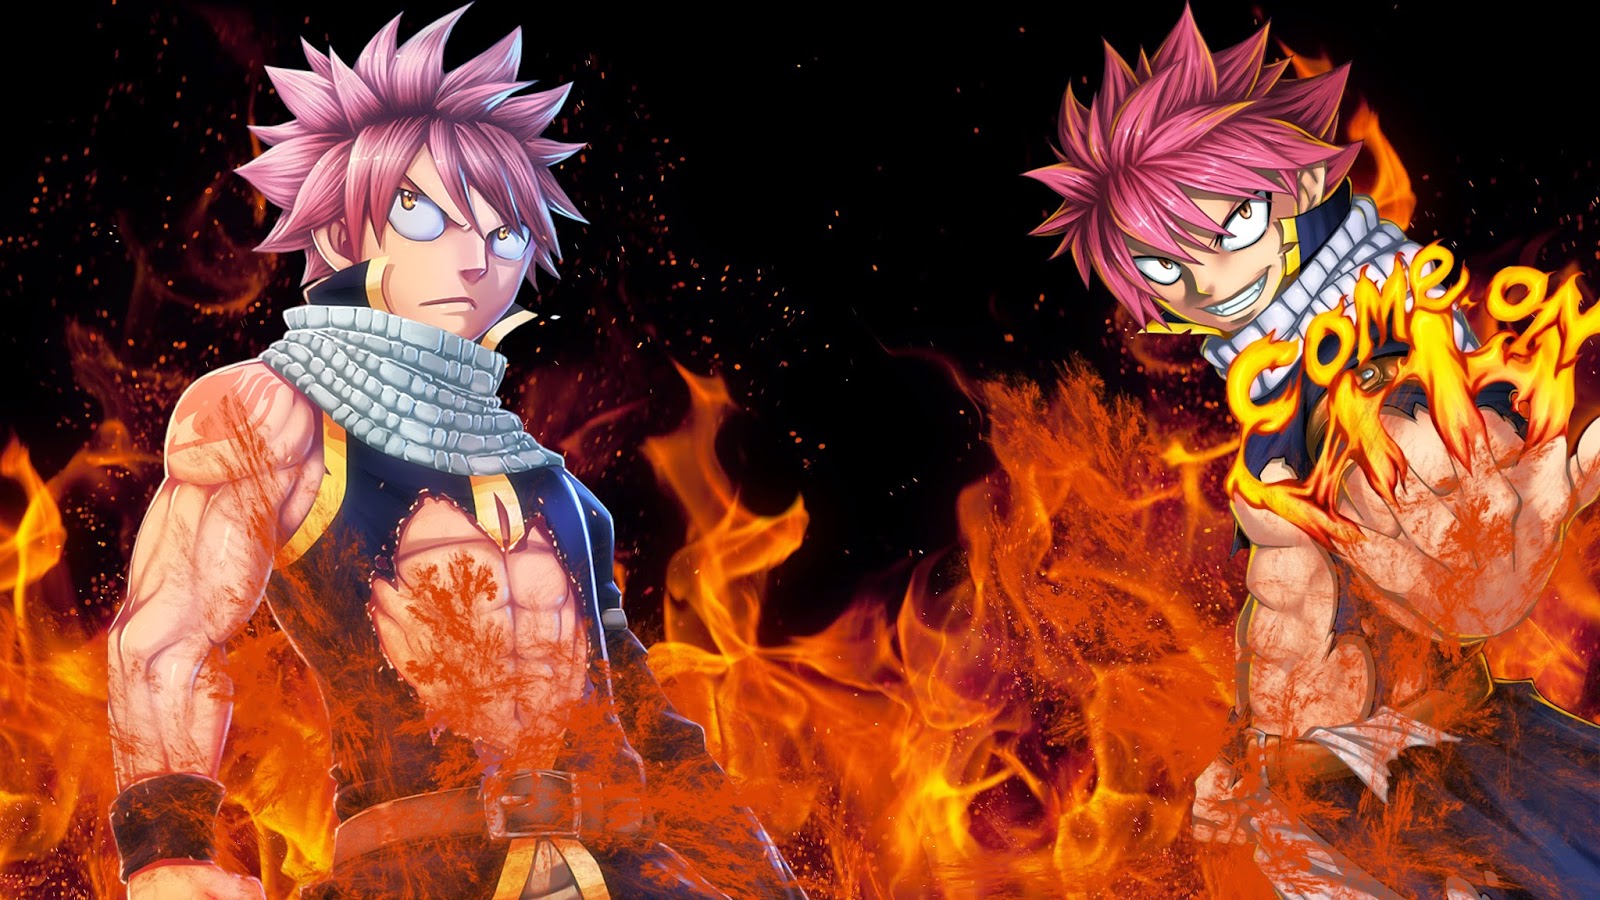 Natsu come on fairy tail other anime background wallpapers on. 